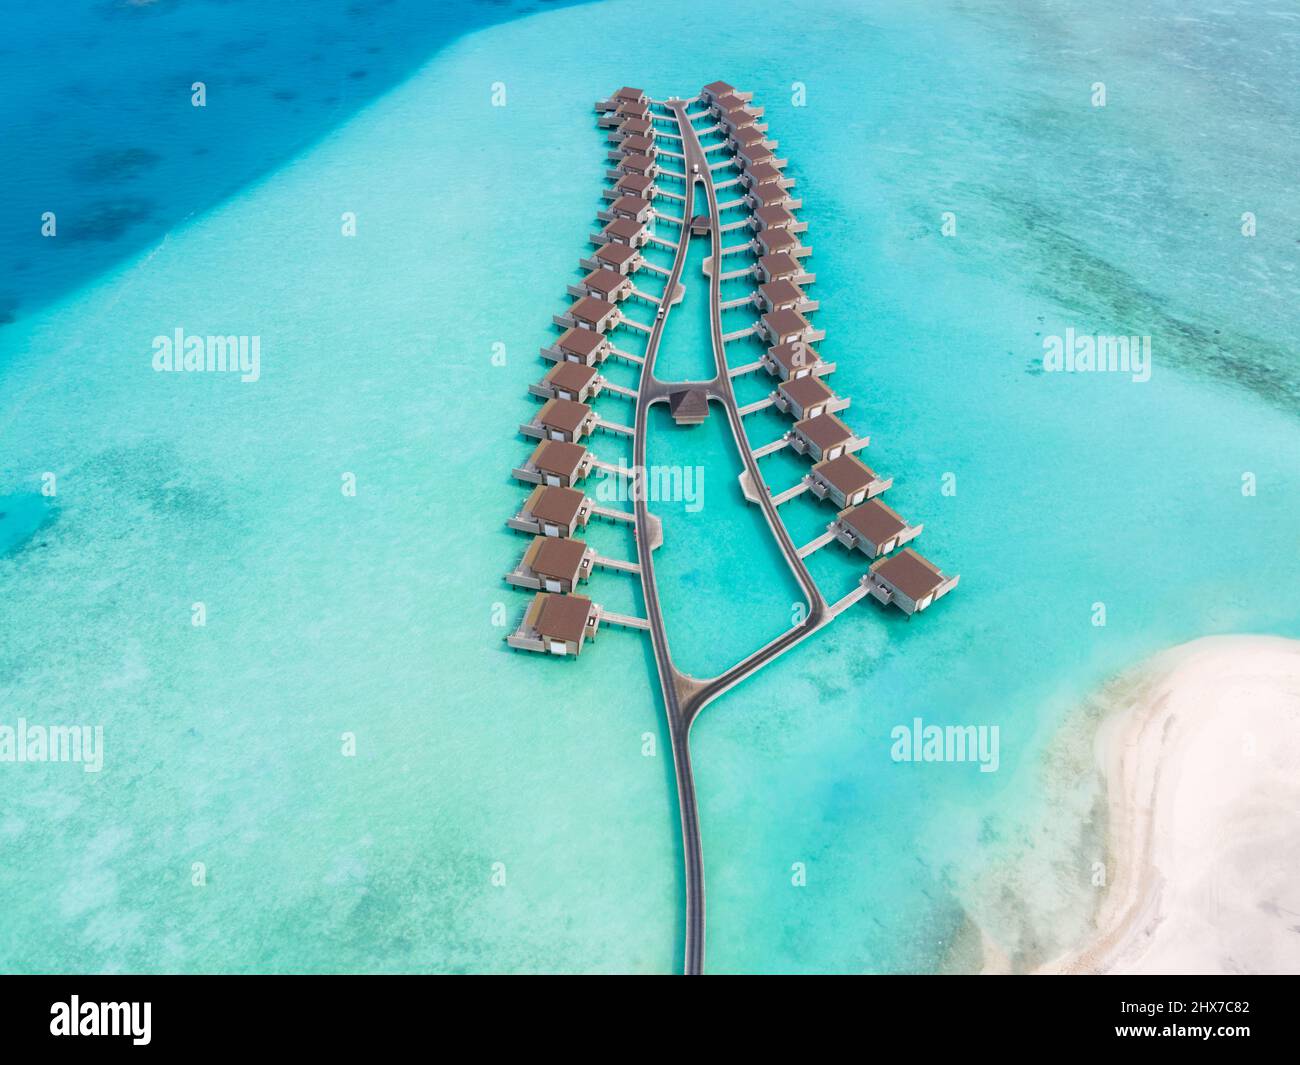 Overwater villas and white sand beach on tropical atoll island for holidays vacation travel and honeymoon. Luxury resort hotel in Maldives or Caribbea Stock Photo